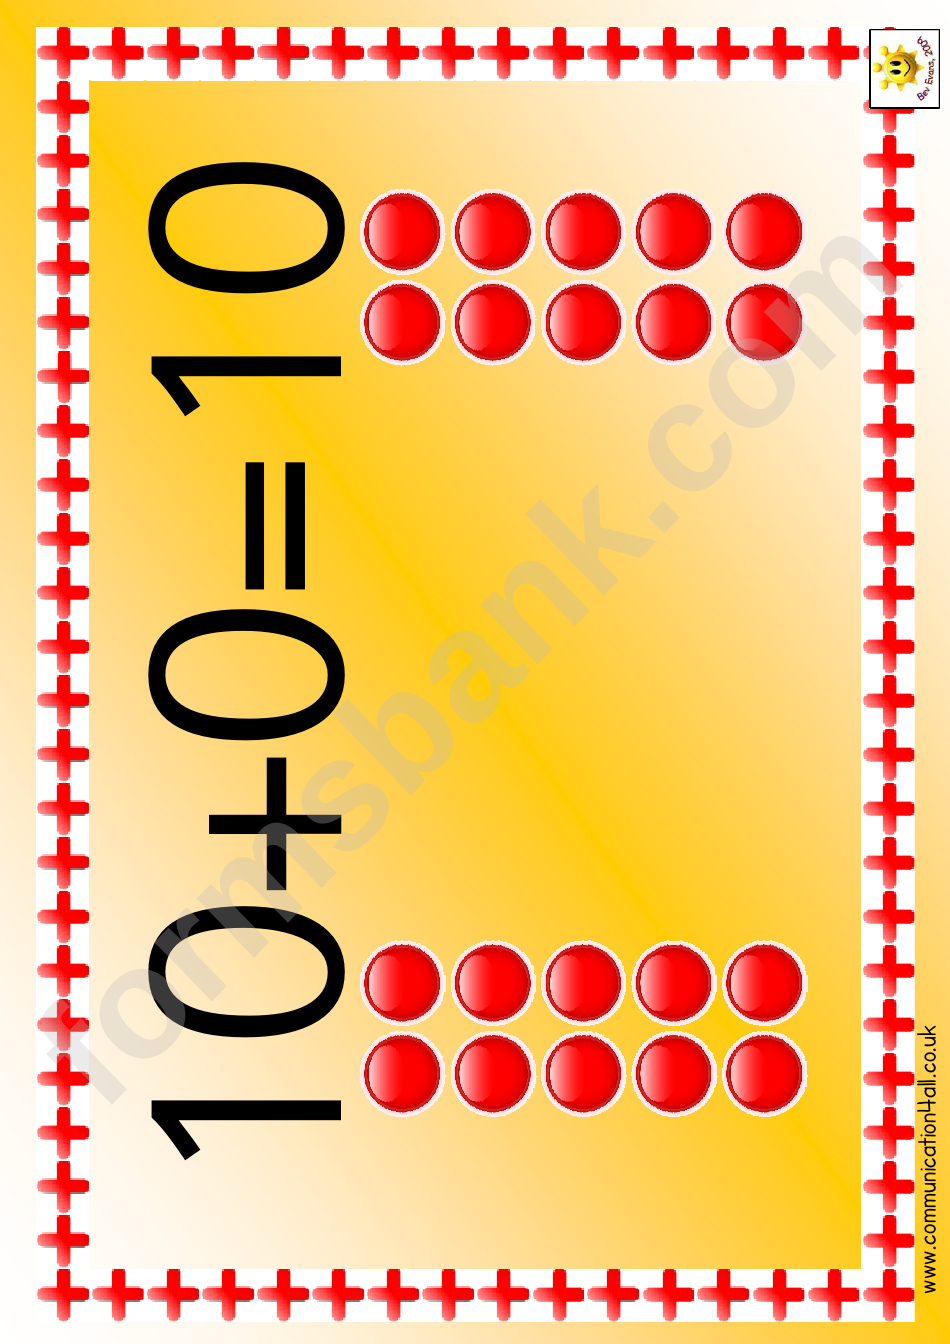 Simple Counting Number Chart - 0-10